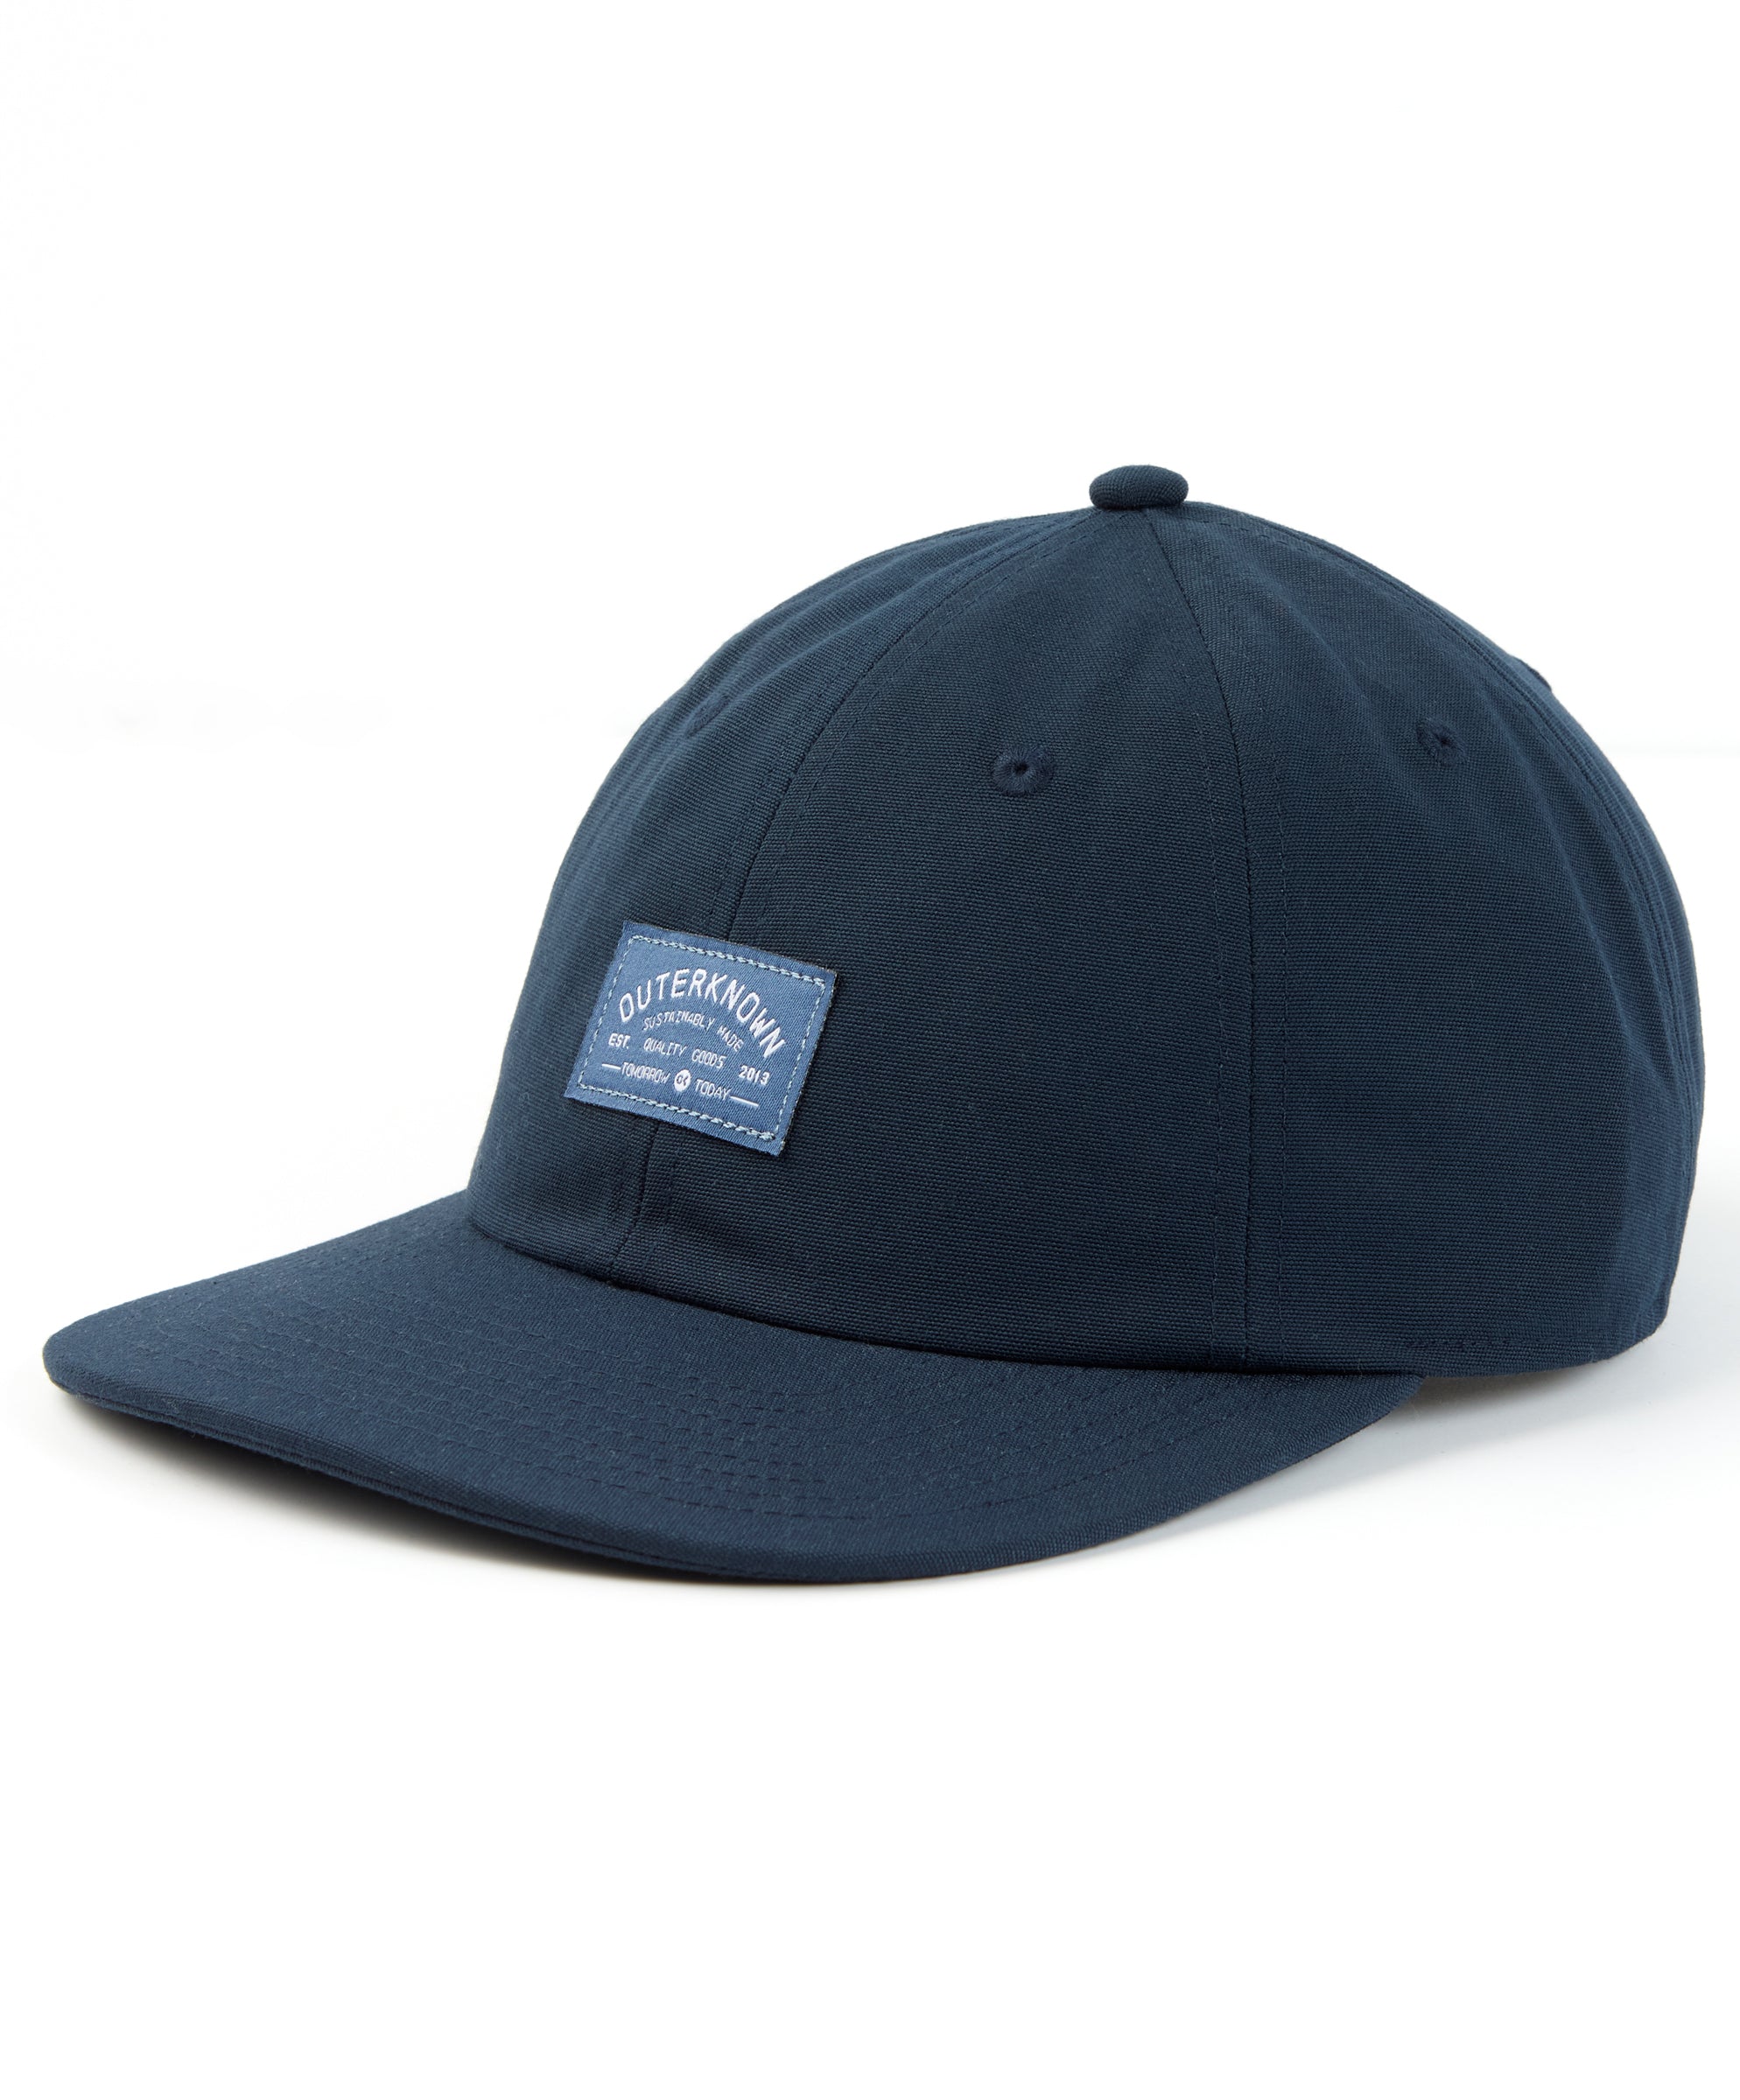 Industrial Outerknown Camp Hat | Men's Accessories | Outerknown